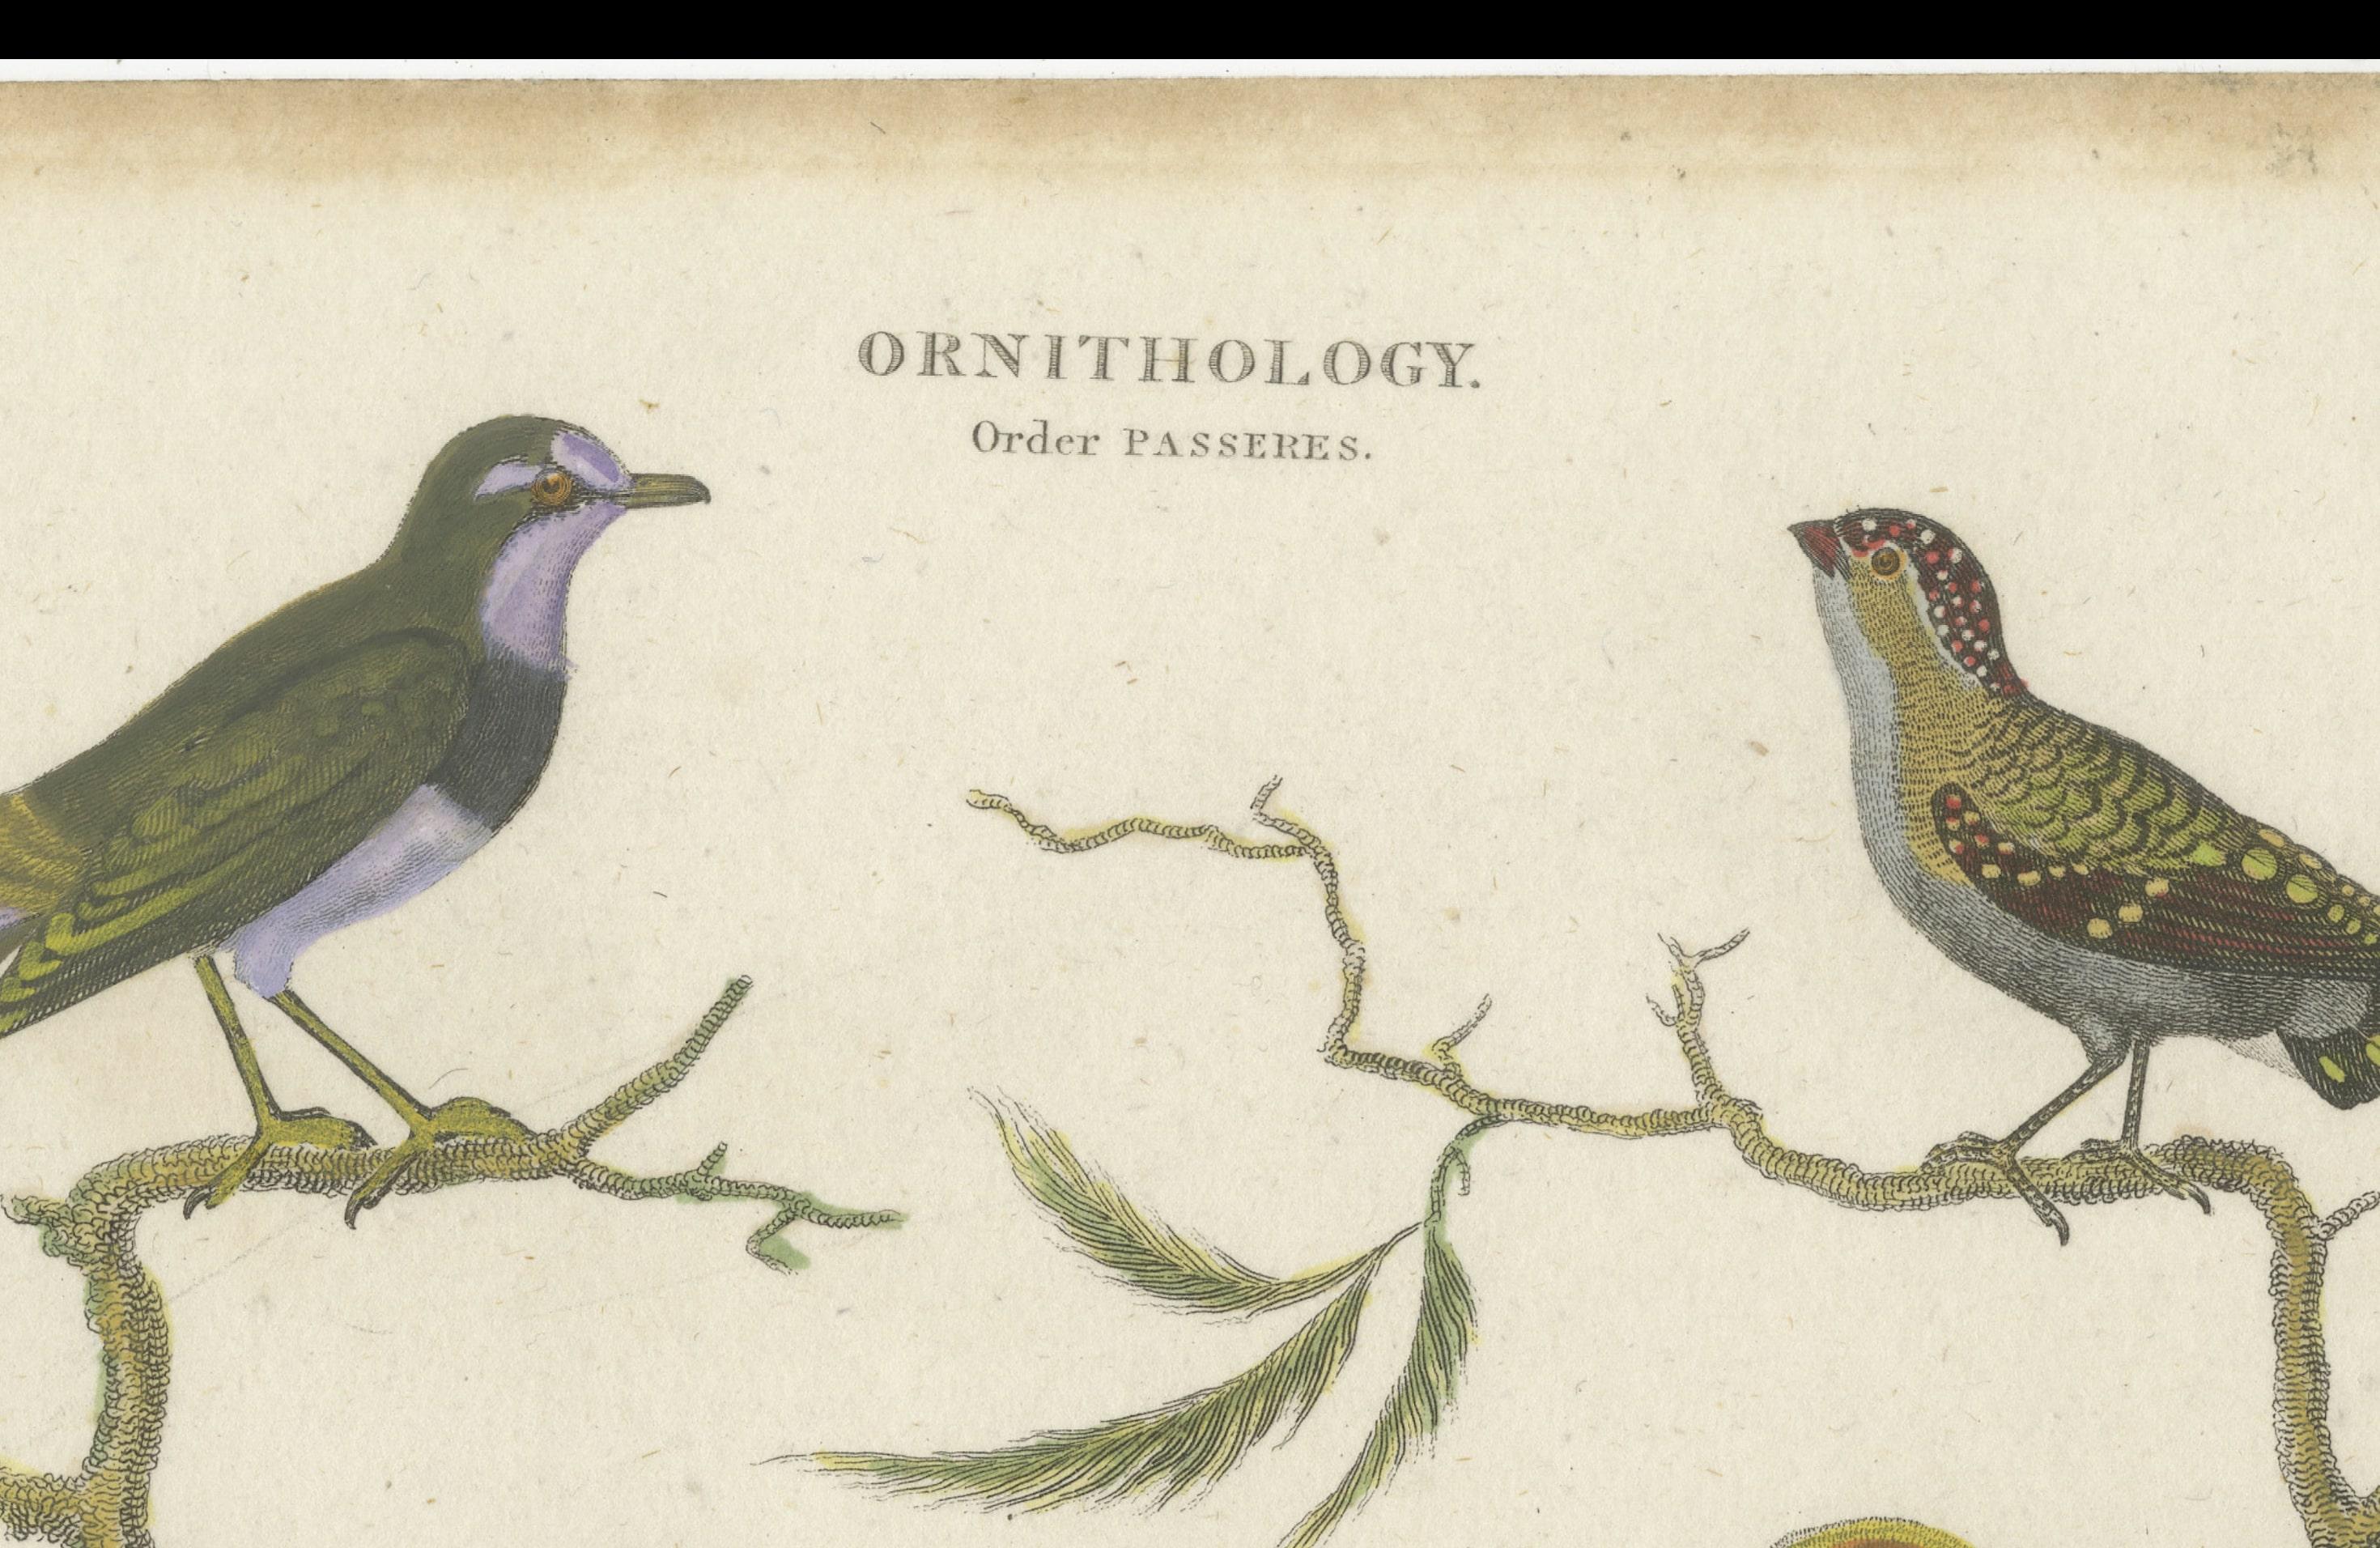 This rare original handcolored print includes detailed illustrations of birds, and there is text at the bottom that serves to identify each bird depicted. Here's the transcribed text along with a description:

1. M. pileata 
   (Warbler)
  